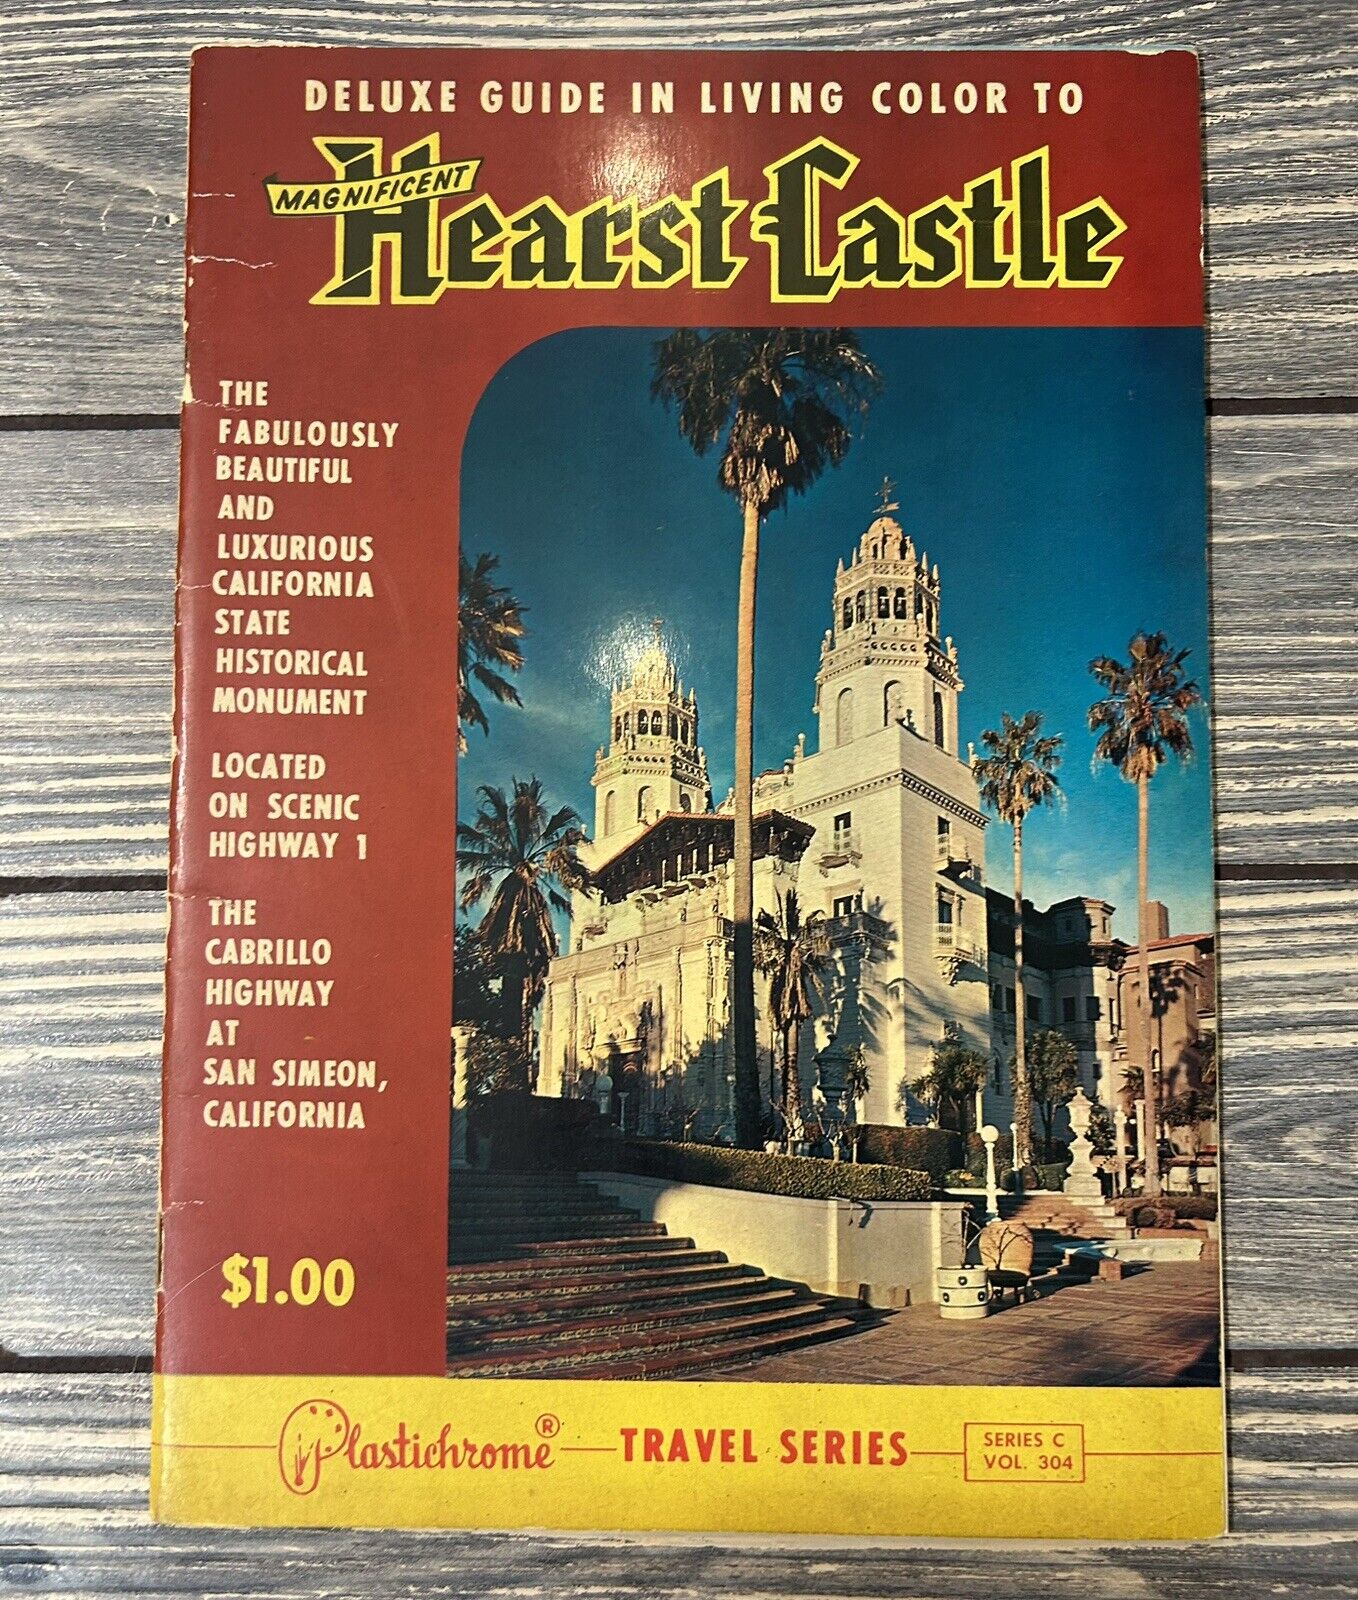 Vintage Deluxe Guide In Living Color To Magnificent Hearst Castle Travel Book